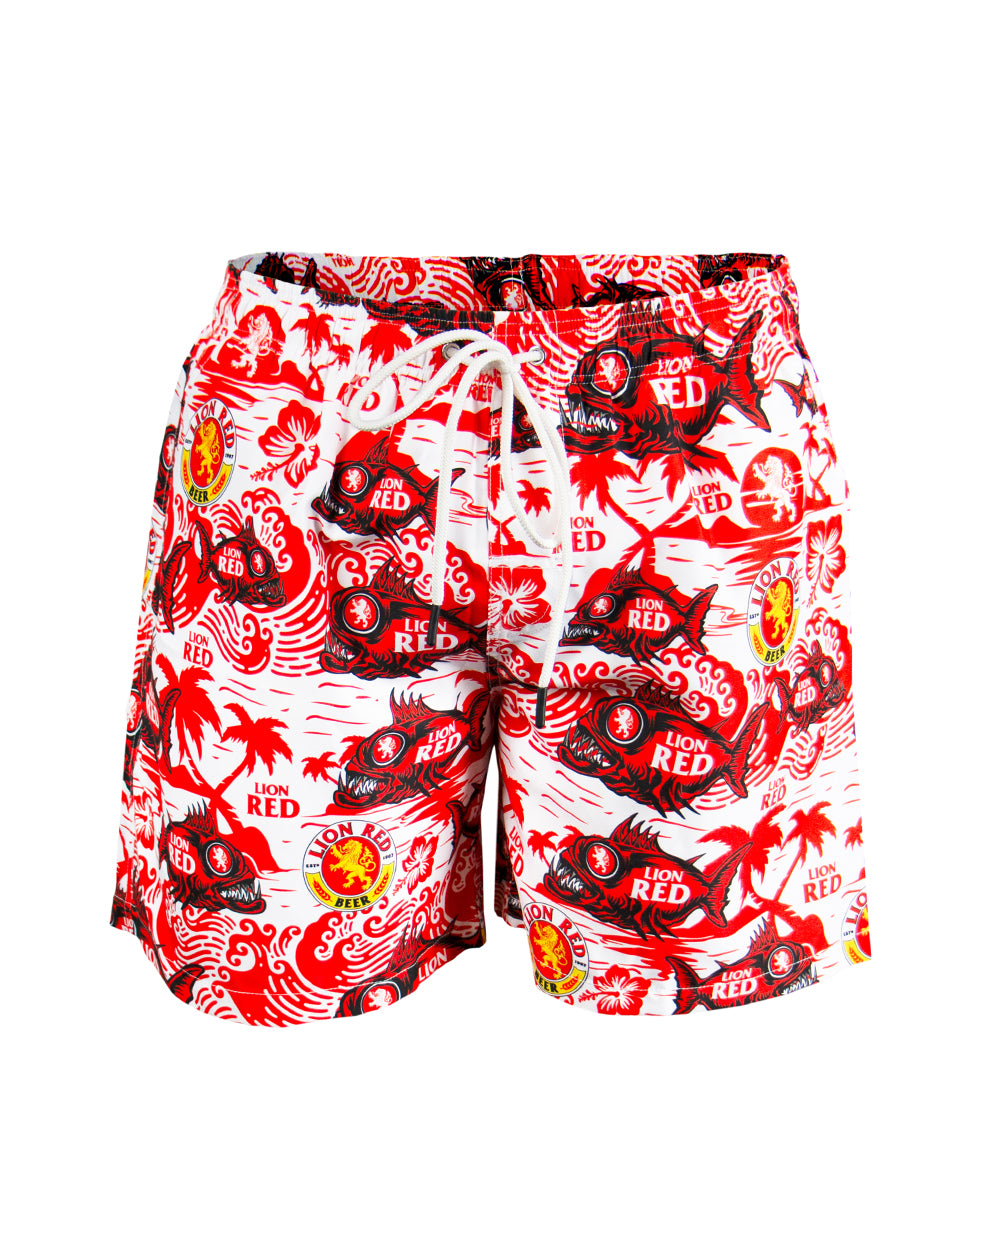 Lion Red Hawaiian Shorts -  Beer Gear Apparel & Merchandise - Speights - Lion Red - VB - Tokyo Dy merch